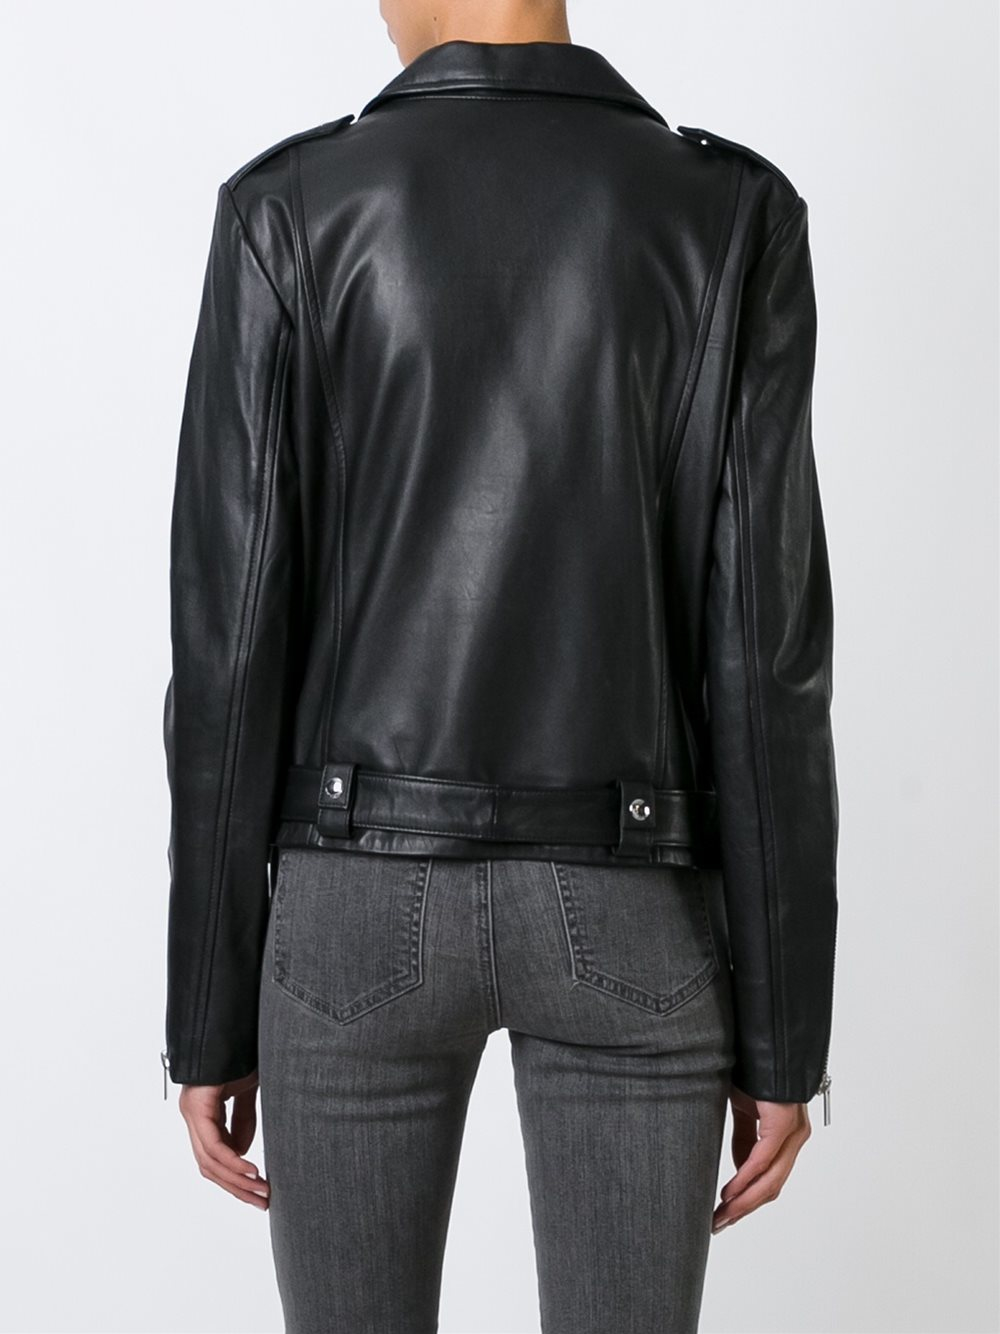 Ash Leather 'Volcano' Jacket in Black - Lyst